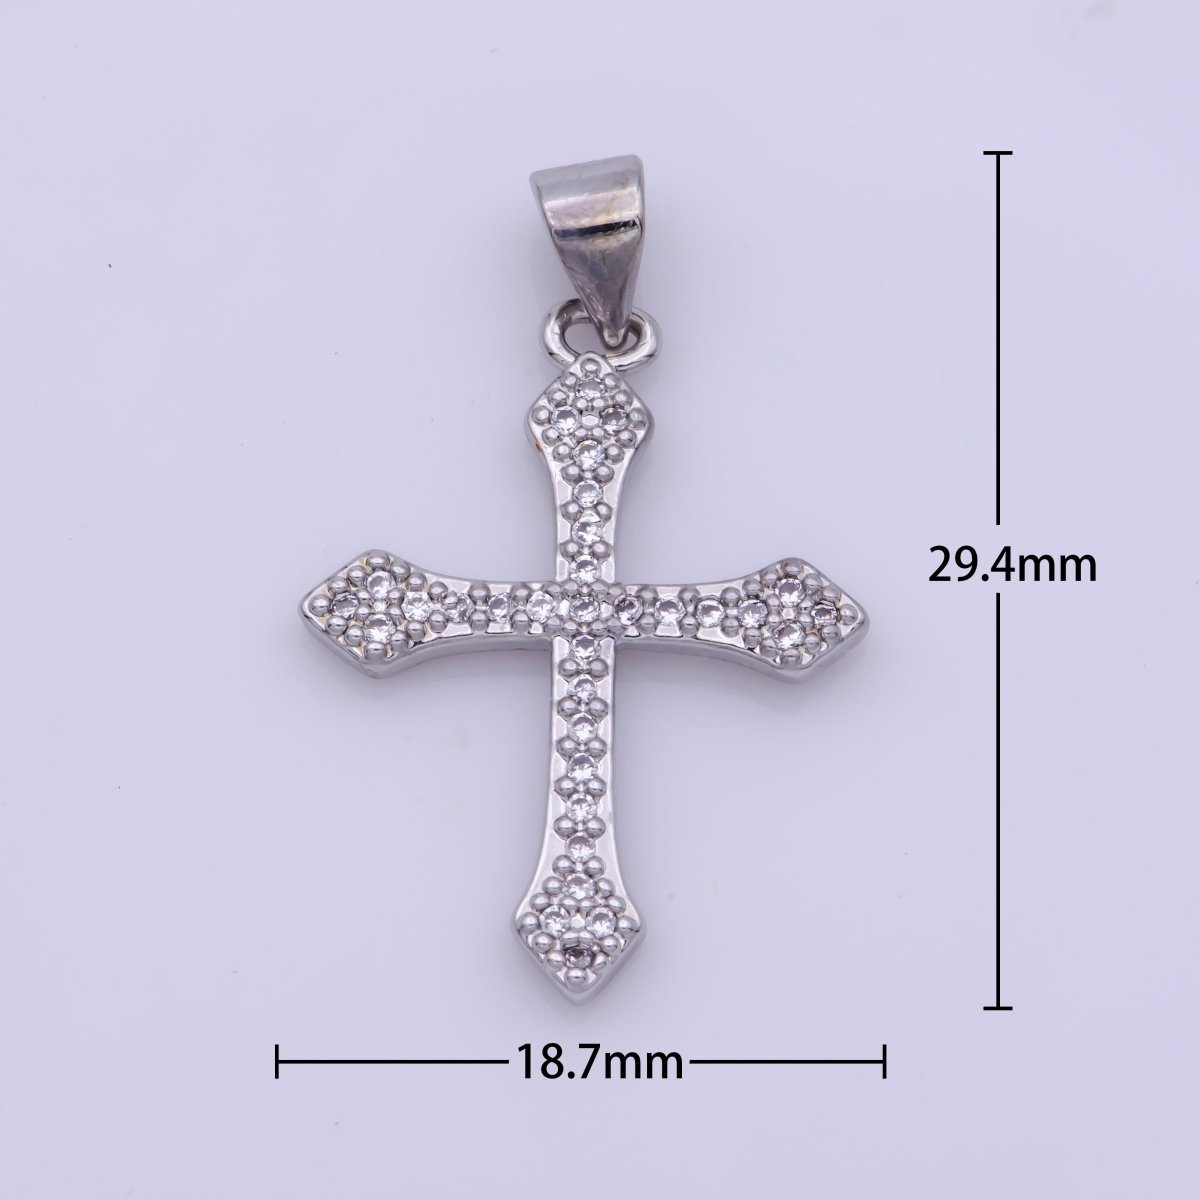 Rhodium Plated, 14K Gold Filled Cubic Zirconia Pave Cross Charm, Silver Cross Pendant CZ Micro Pave Cross, Ornate Cross Pendant, CZ Cross Layer Necklace, Elegance Cross, Cubic Zirconia Necklace Pendant Charm Bails Findings for Jewelry Making H-188 - DLUXCA